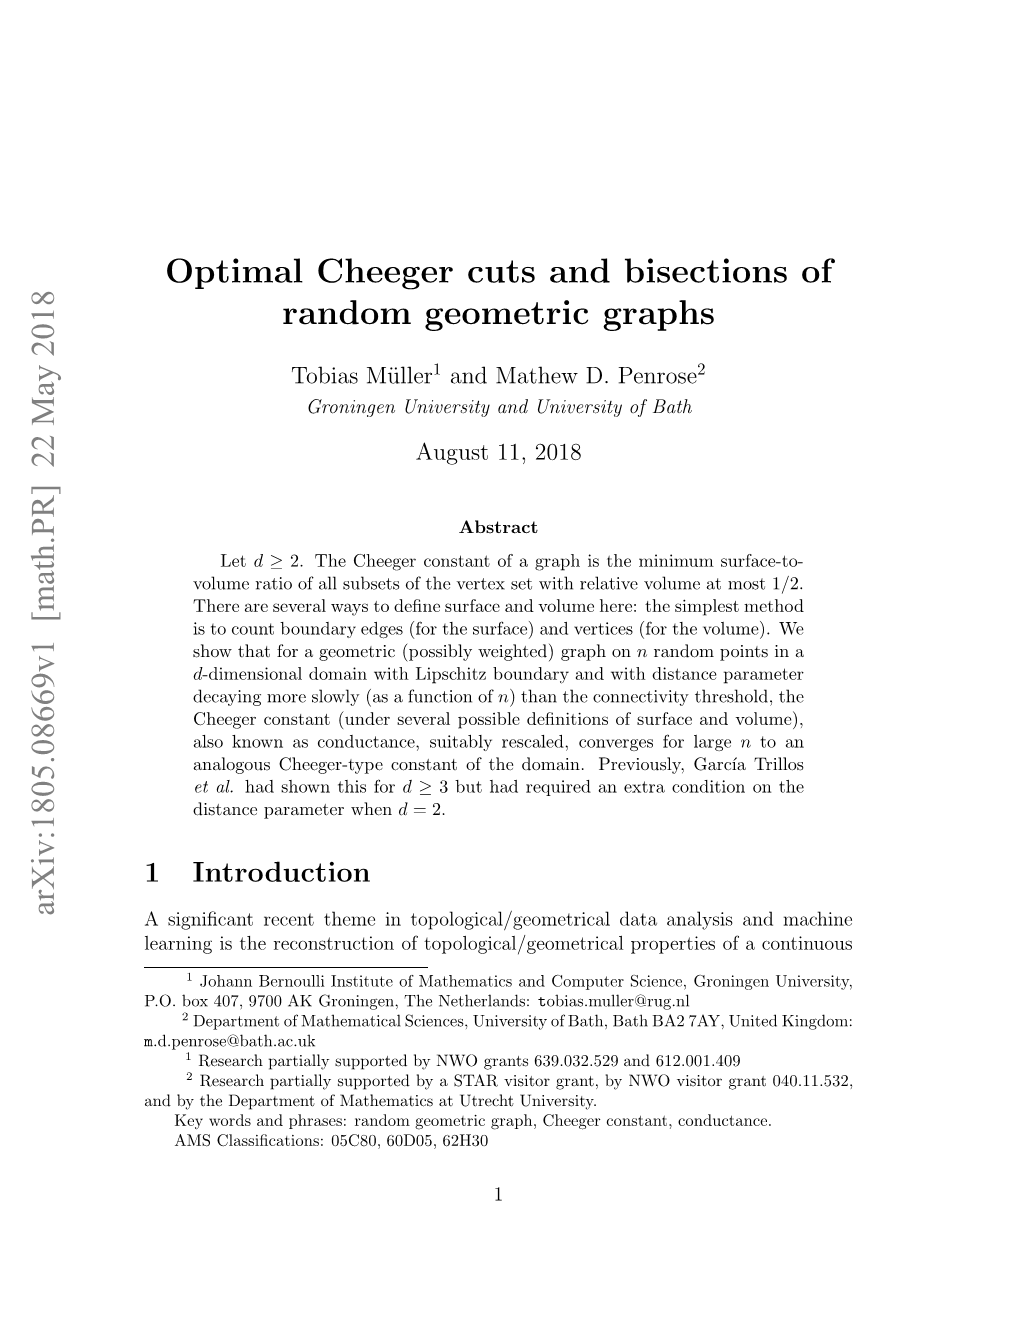 Optimal Cheeger Cuts and Bisections of Random Geometric Graphs